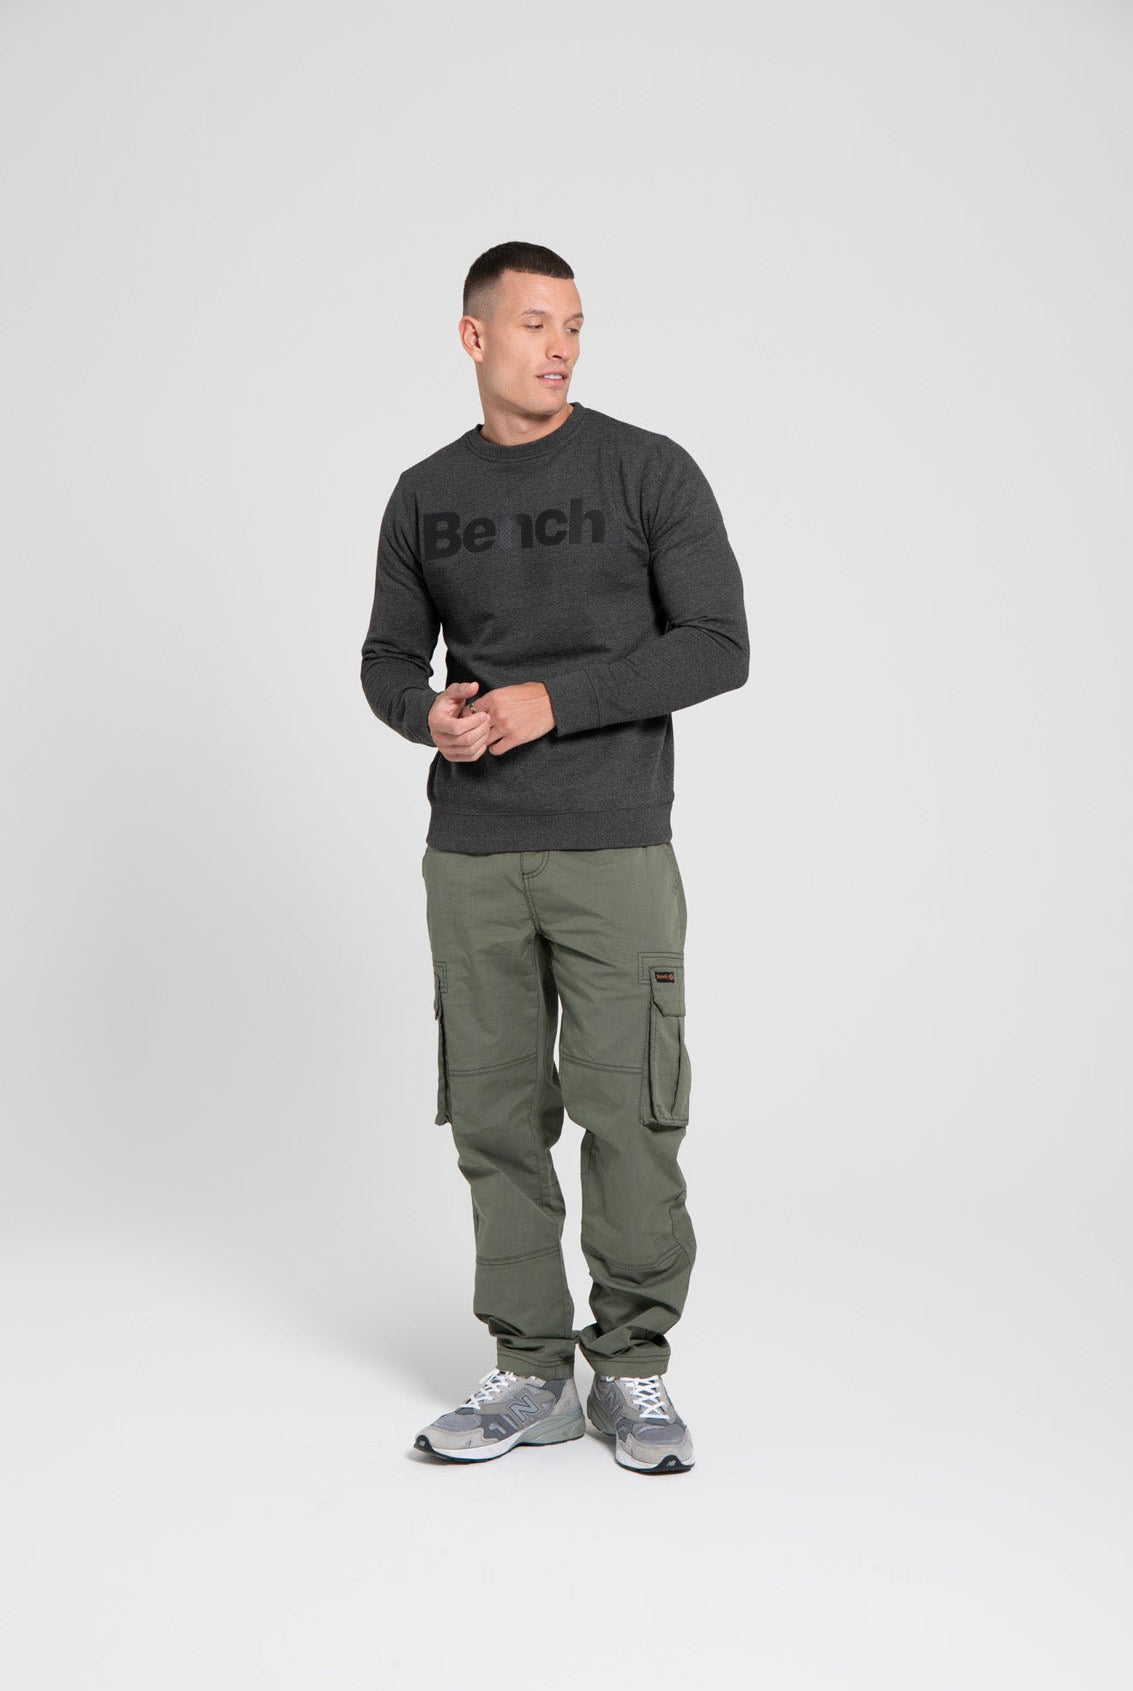 Mens 'TIPSTER' Spots Crew Sweat - CHARCOAL MARL - Shop at www.Bench.co.uk #LoveMyHood